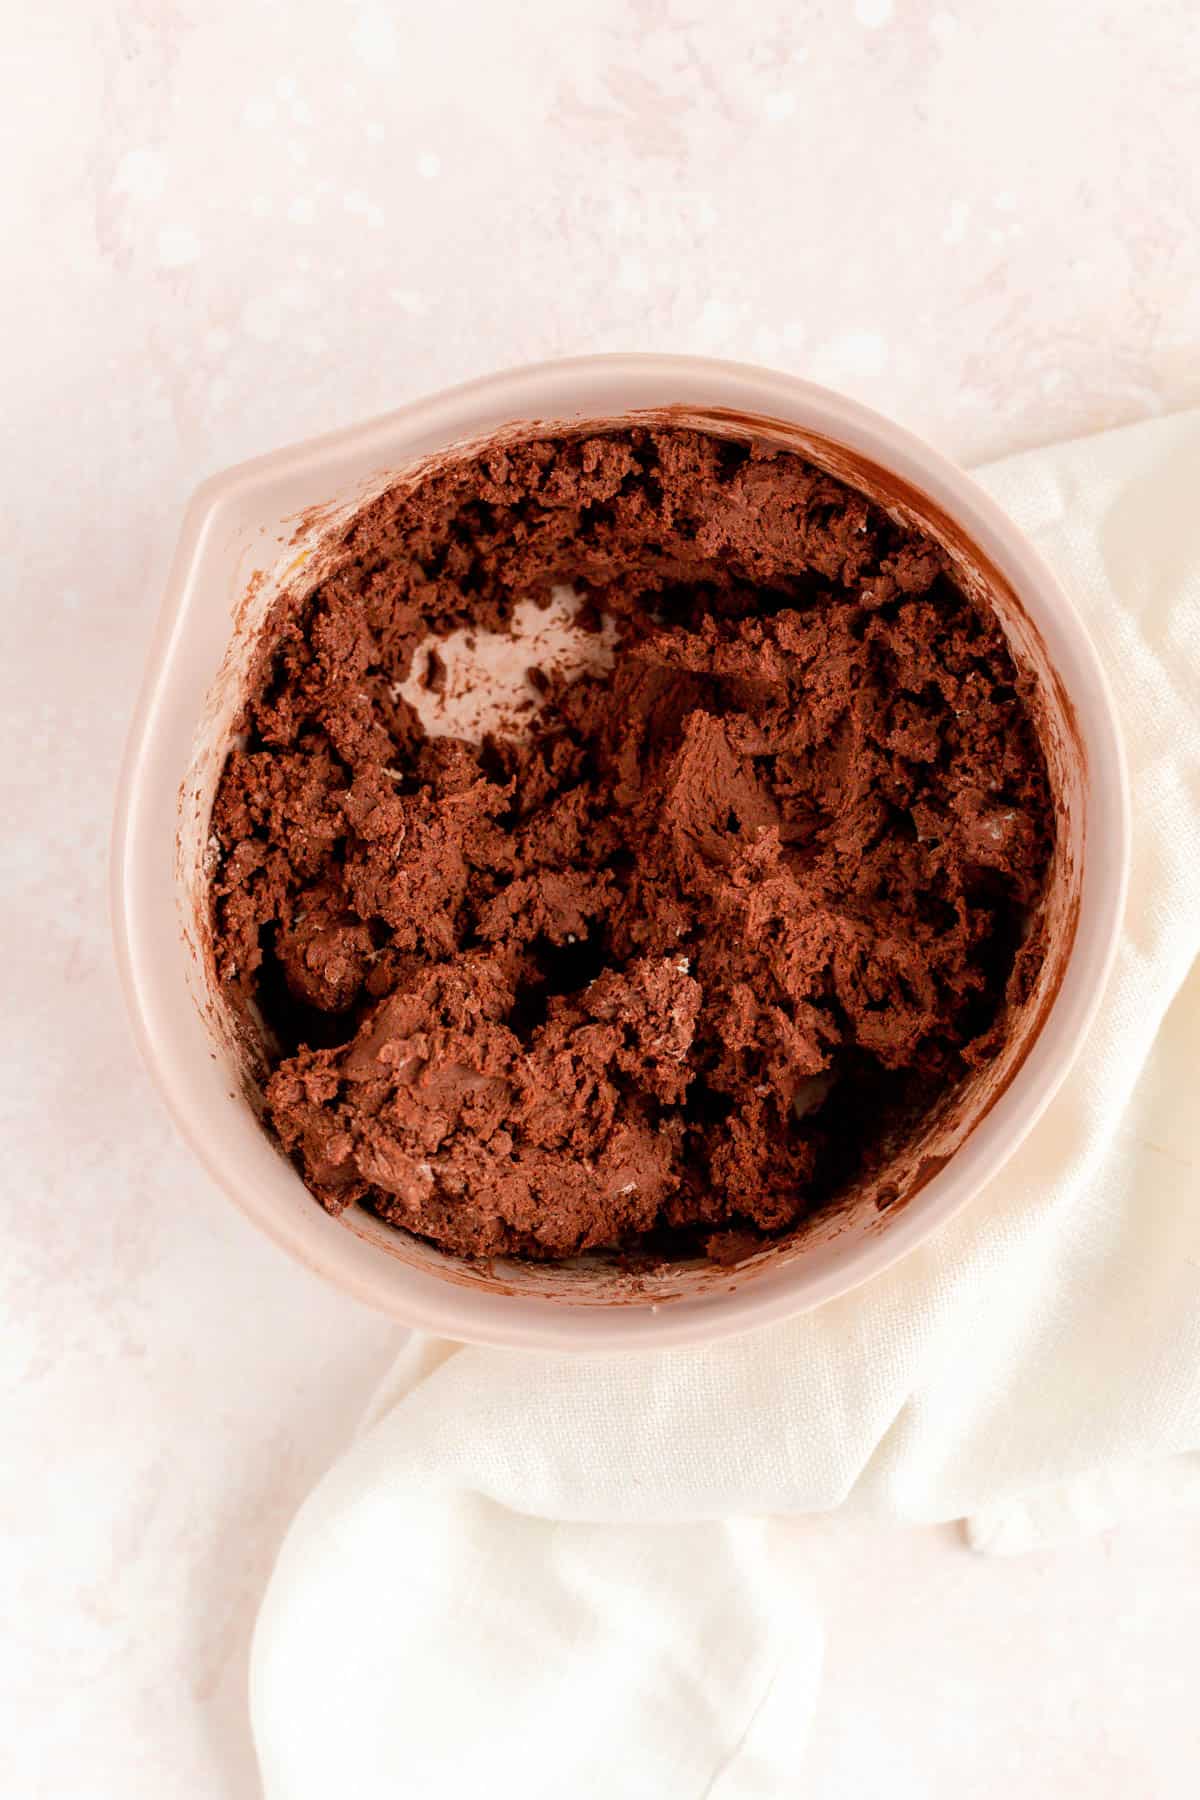 Chocolate butter cookie dough mixed in a brown bowl on a pink background.